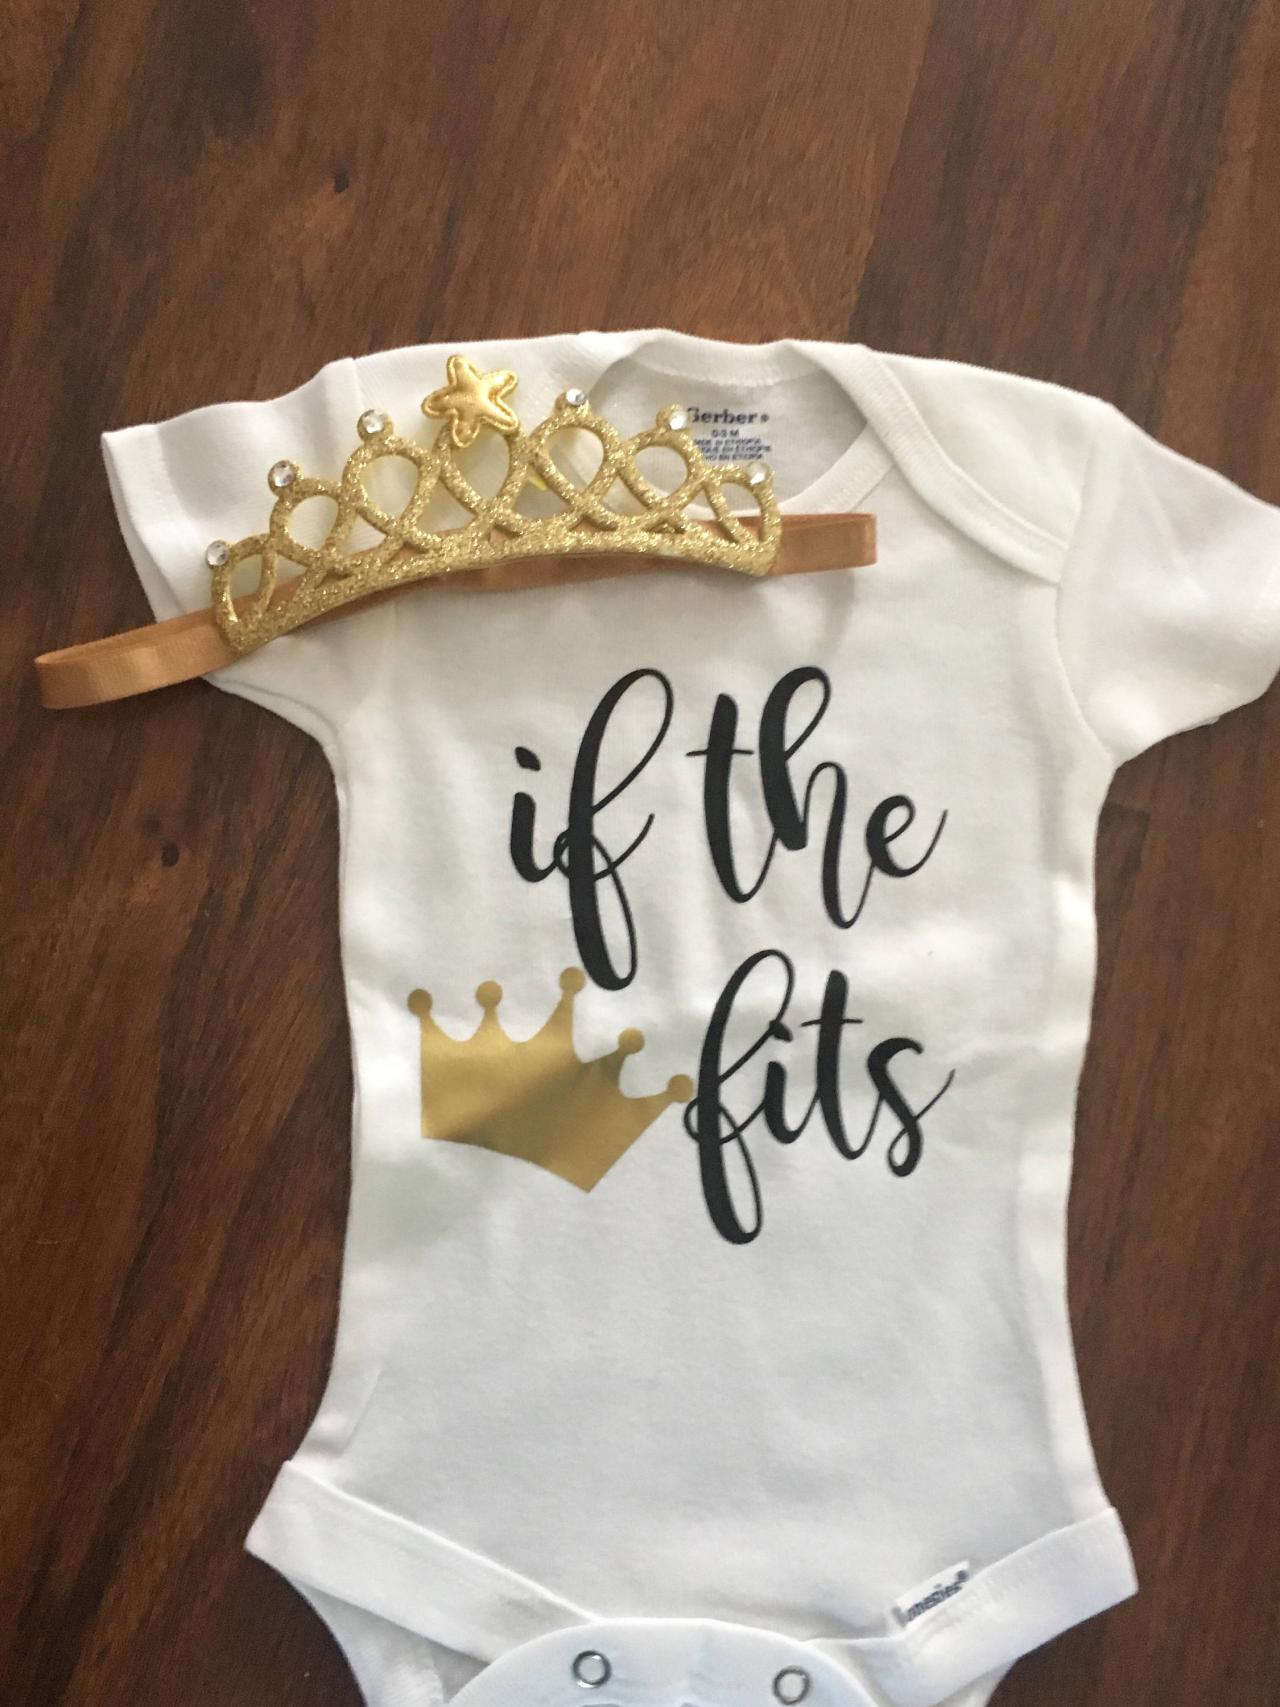 If The Crown Fits. Girls Shirt With Crown Headband. Infant. Toddler. Girl